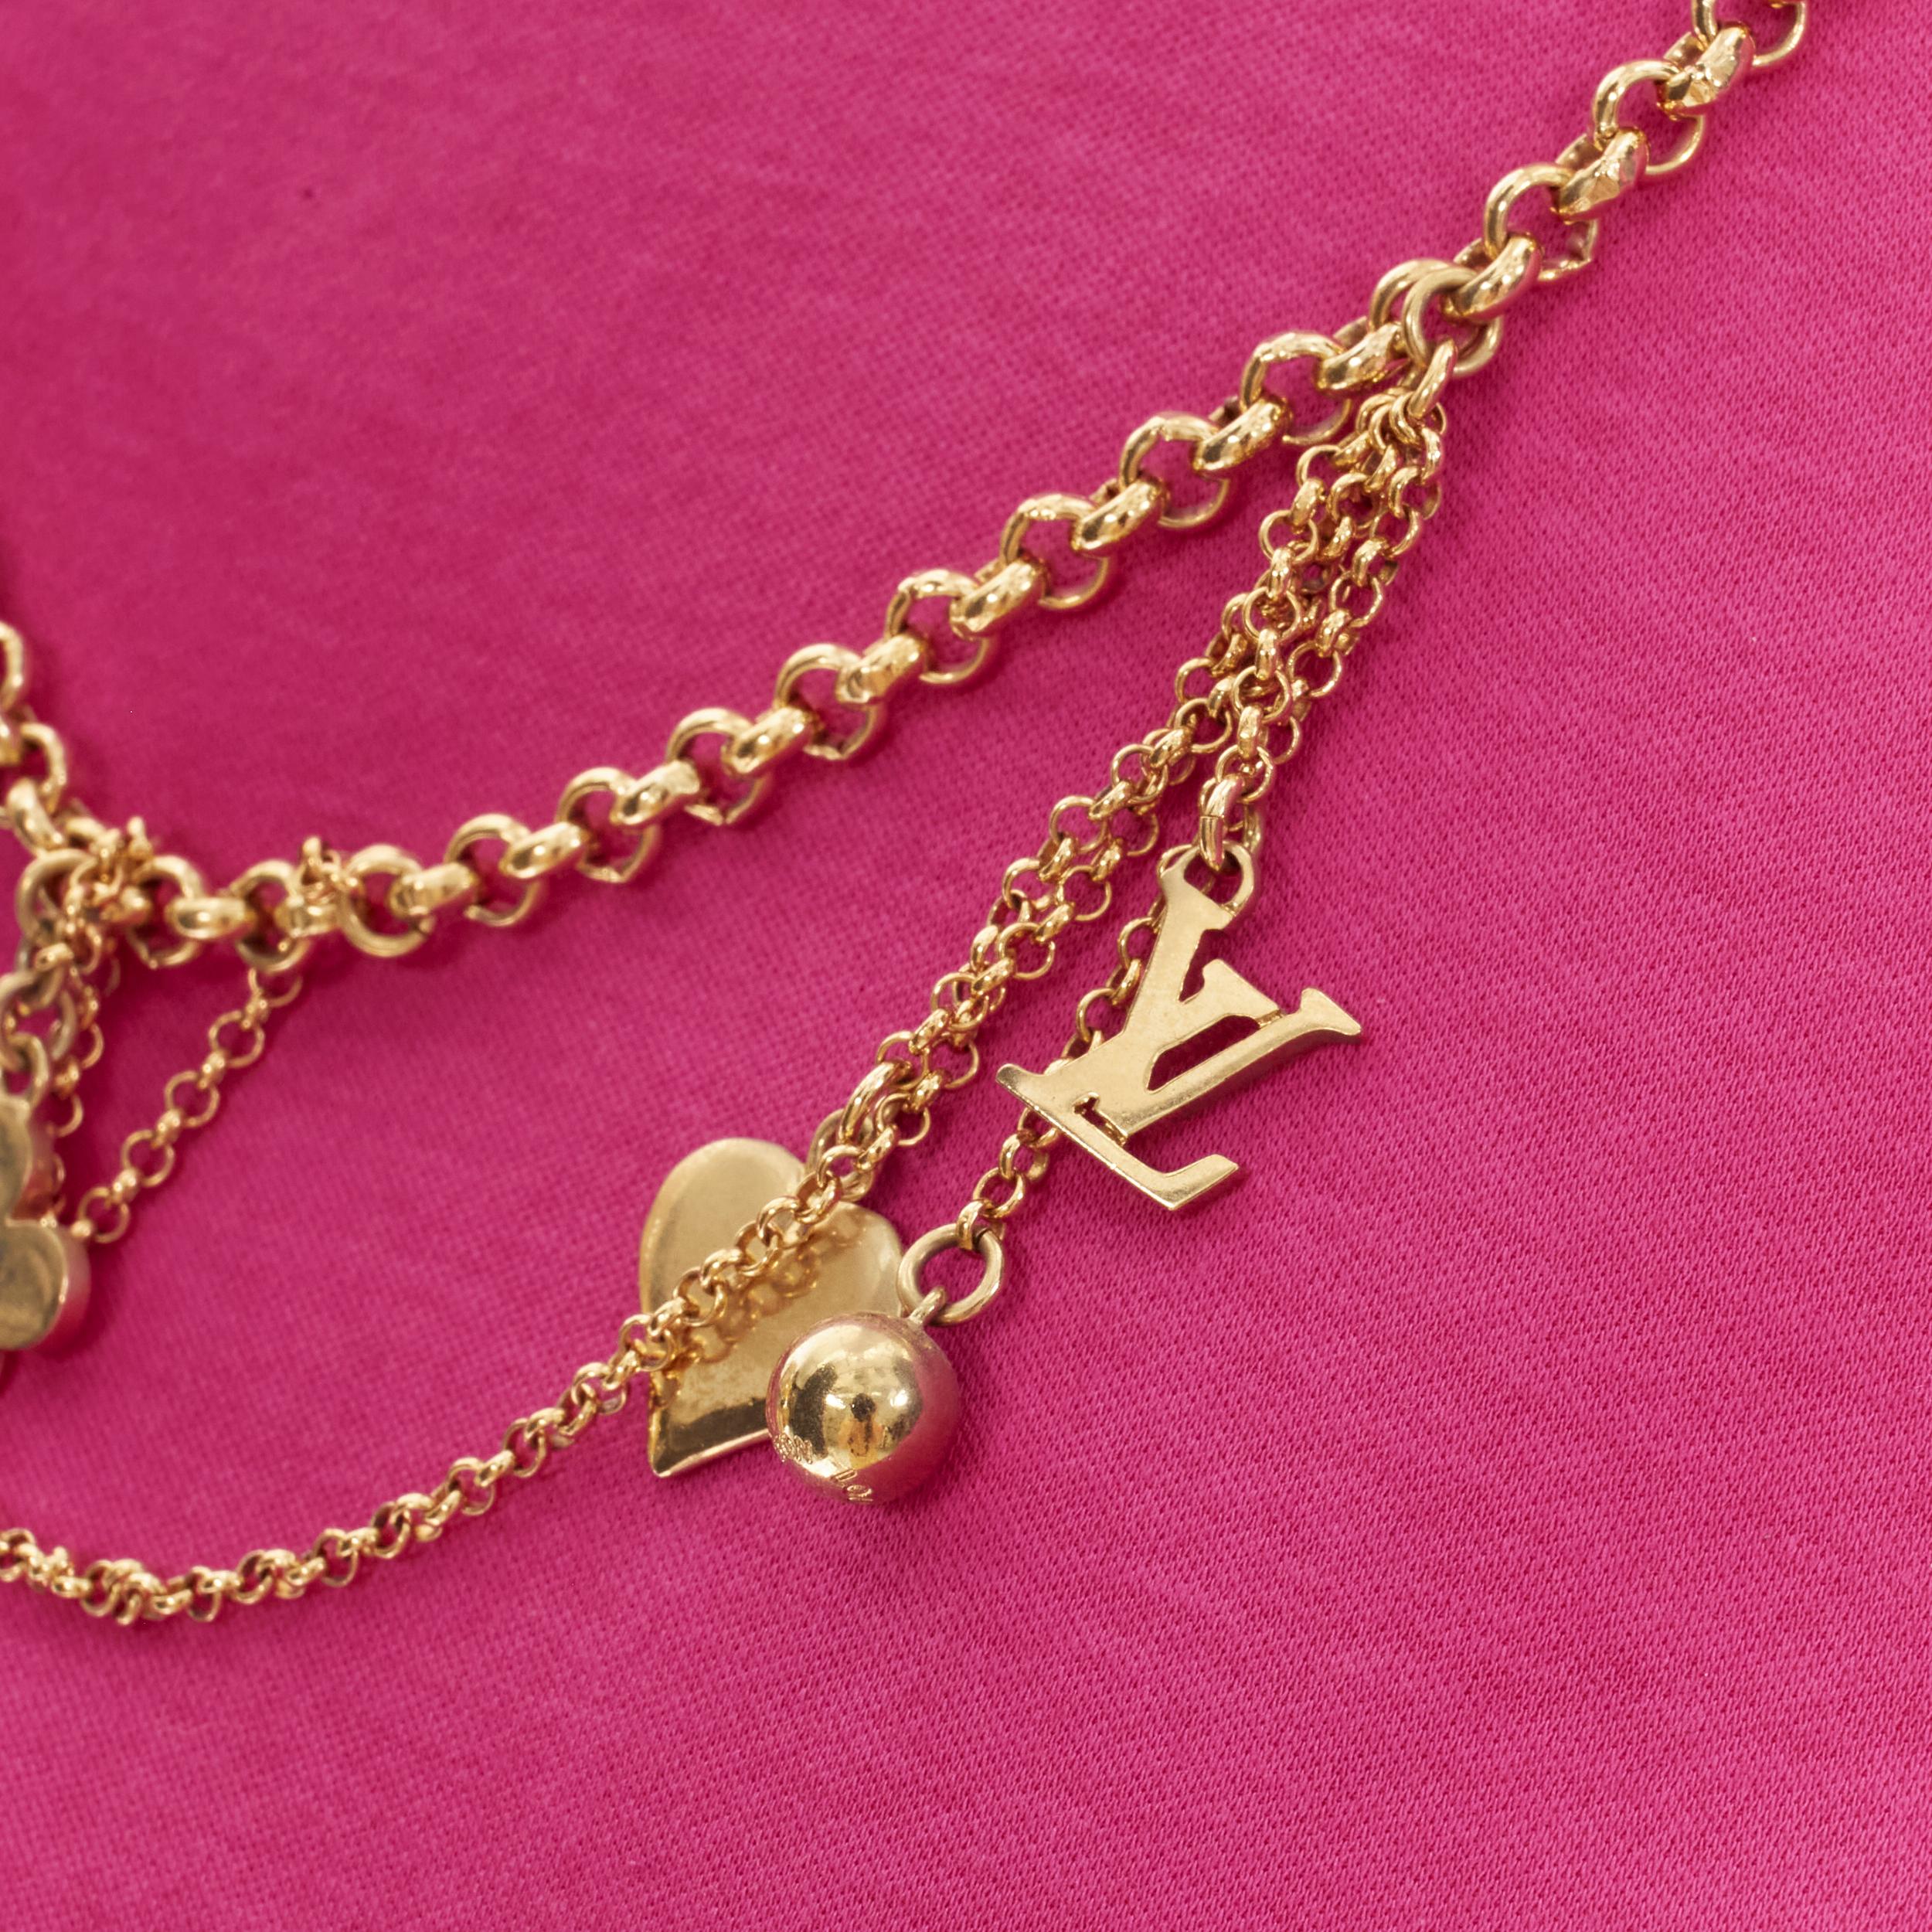 LOUIS VUITTON gold LV charm multi chain ribbon necklace pink cotton tshirt M 
Reference: TGAS/B01401 
Brand: Louis Vuitton 
Material: Cotton 
Color: Pink 
Pattern: Solid 
Extra Detail: Crew neck slim fit Tshirt. LV flower and logo multi charm chain